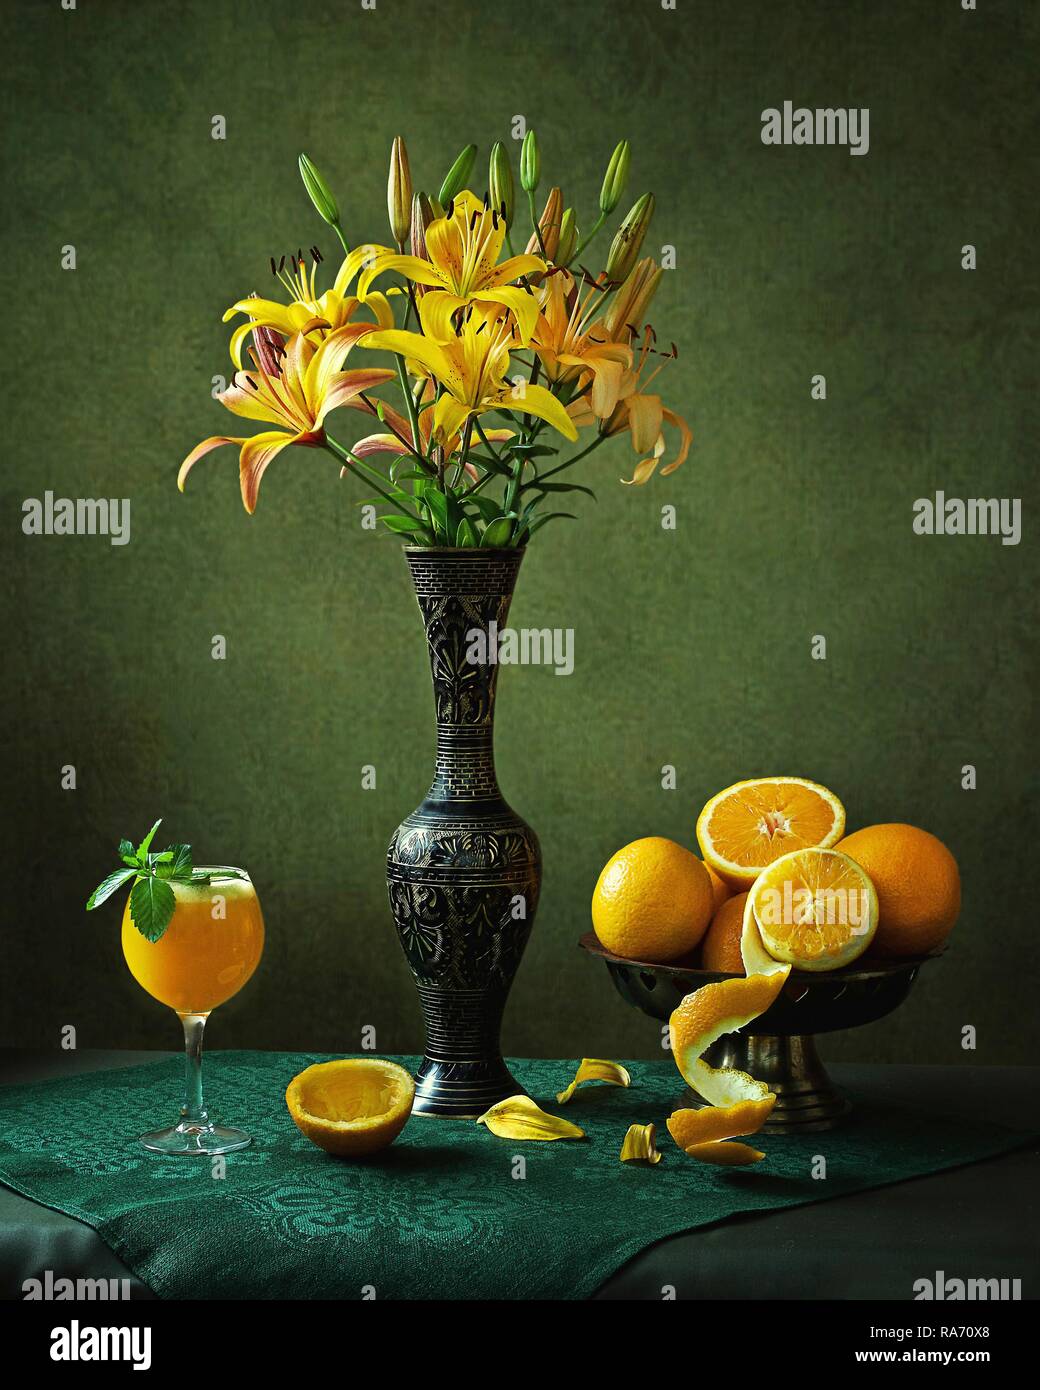 Still life with bouquet of lily flowers Stock Photo